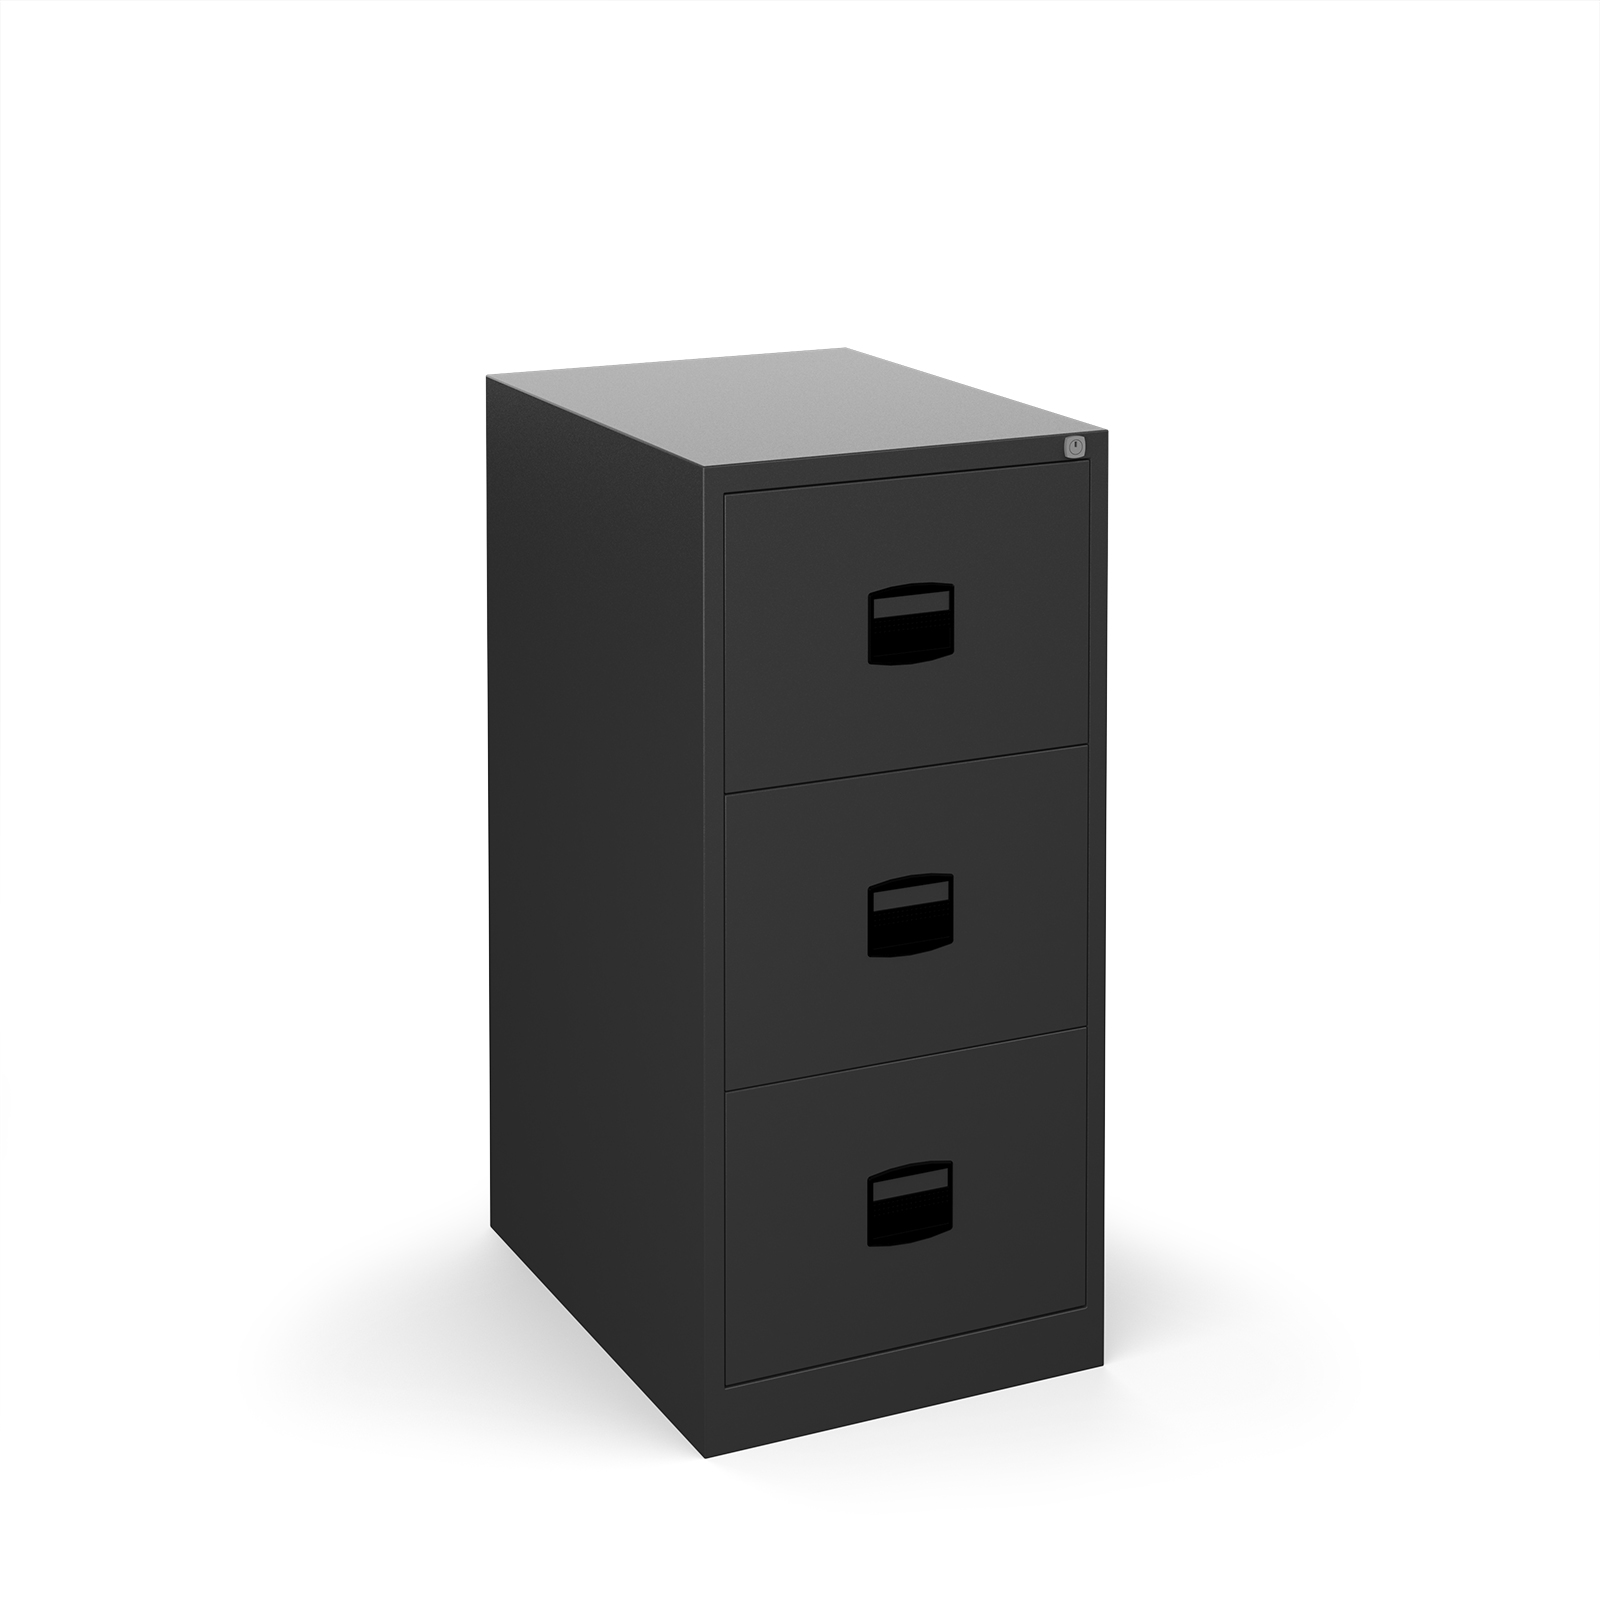 Steel Steel 3 drawer contract filing cabinet 1016mm high - black